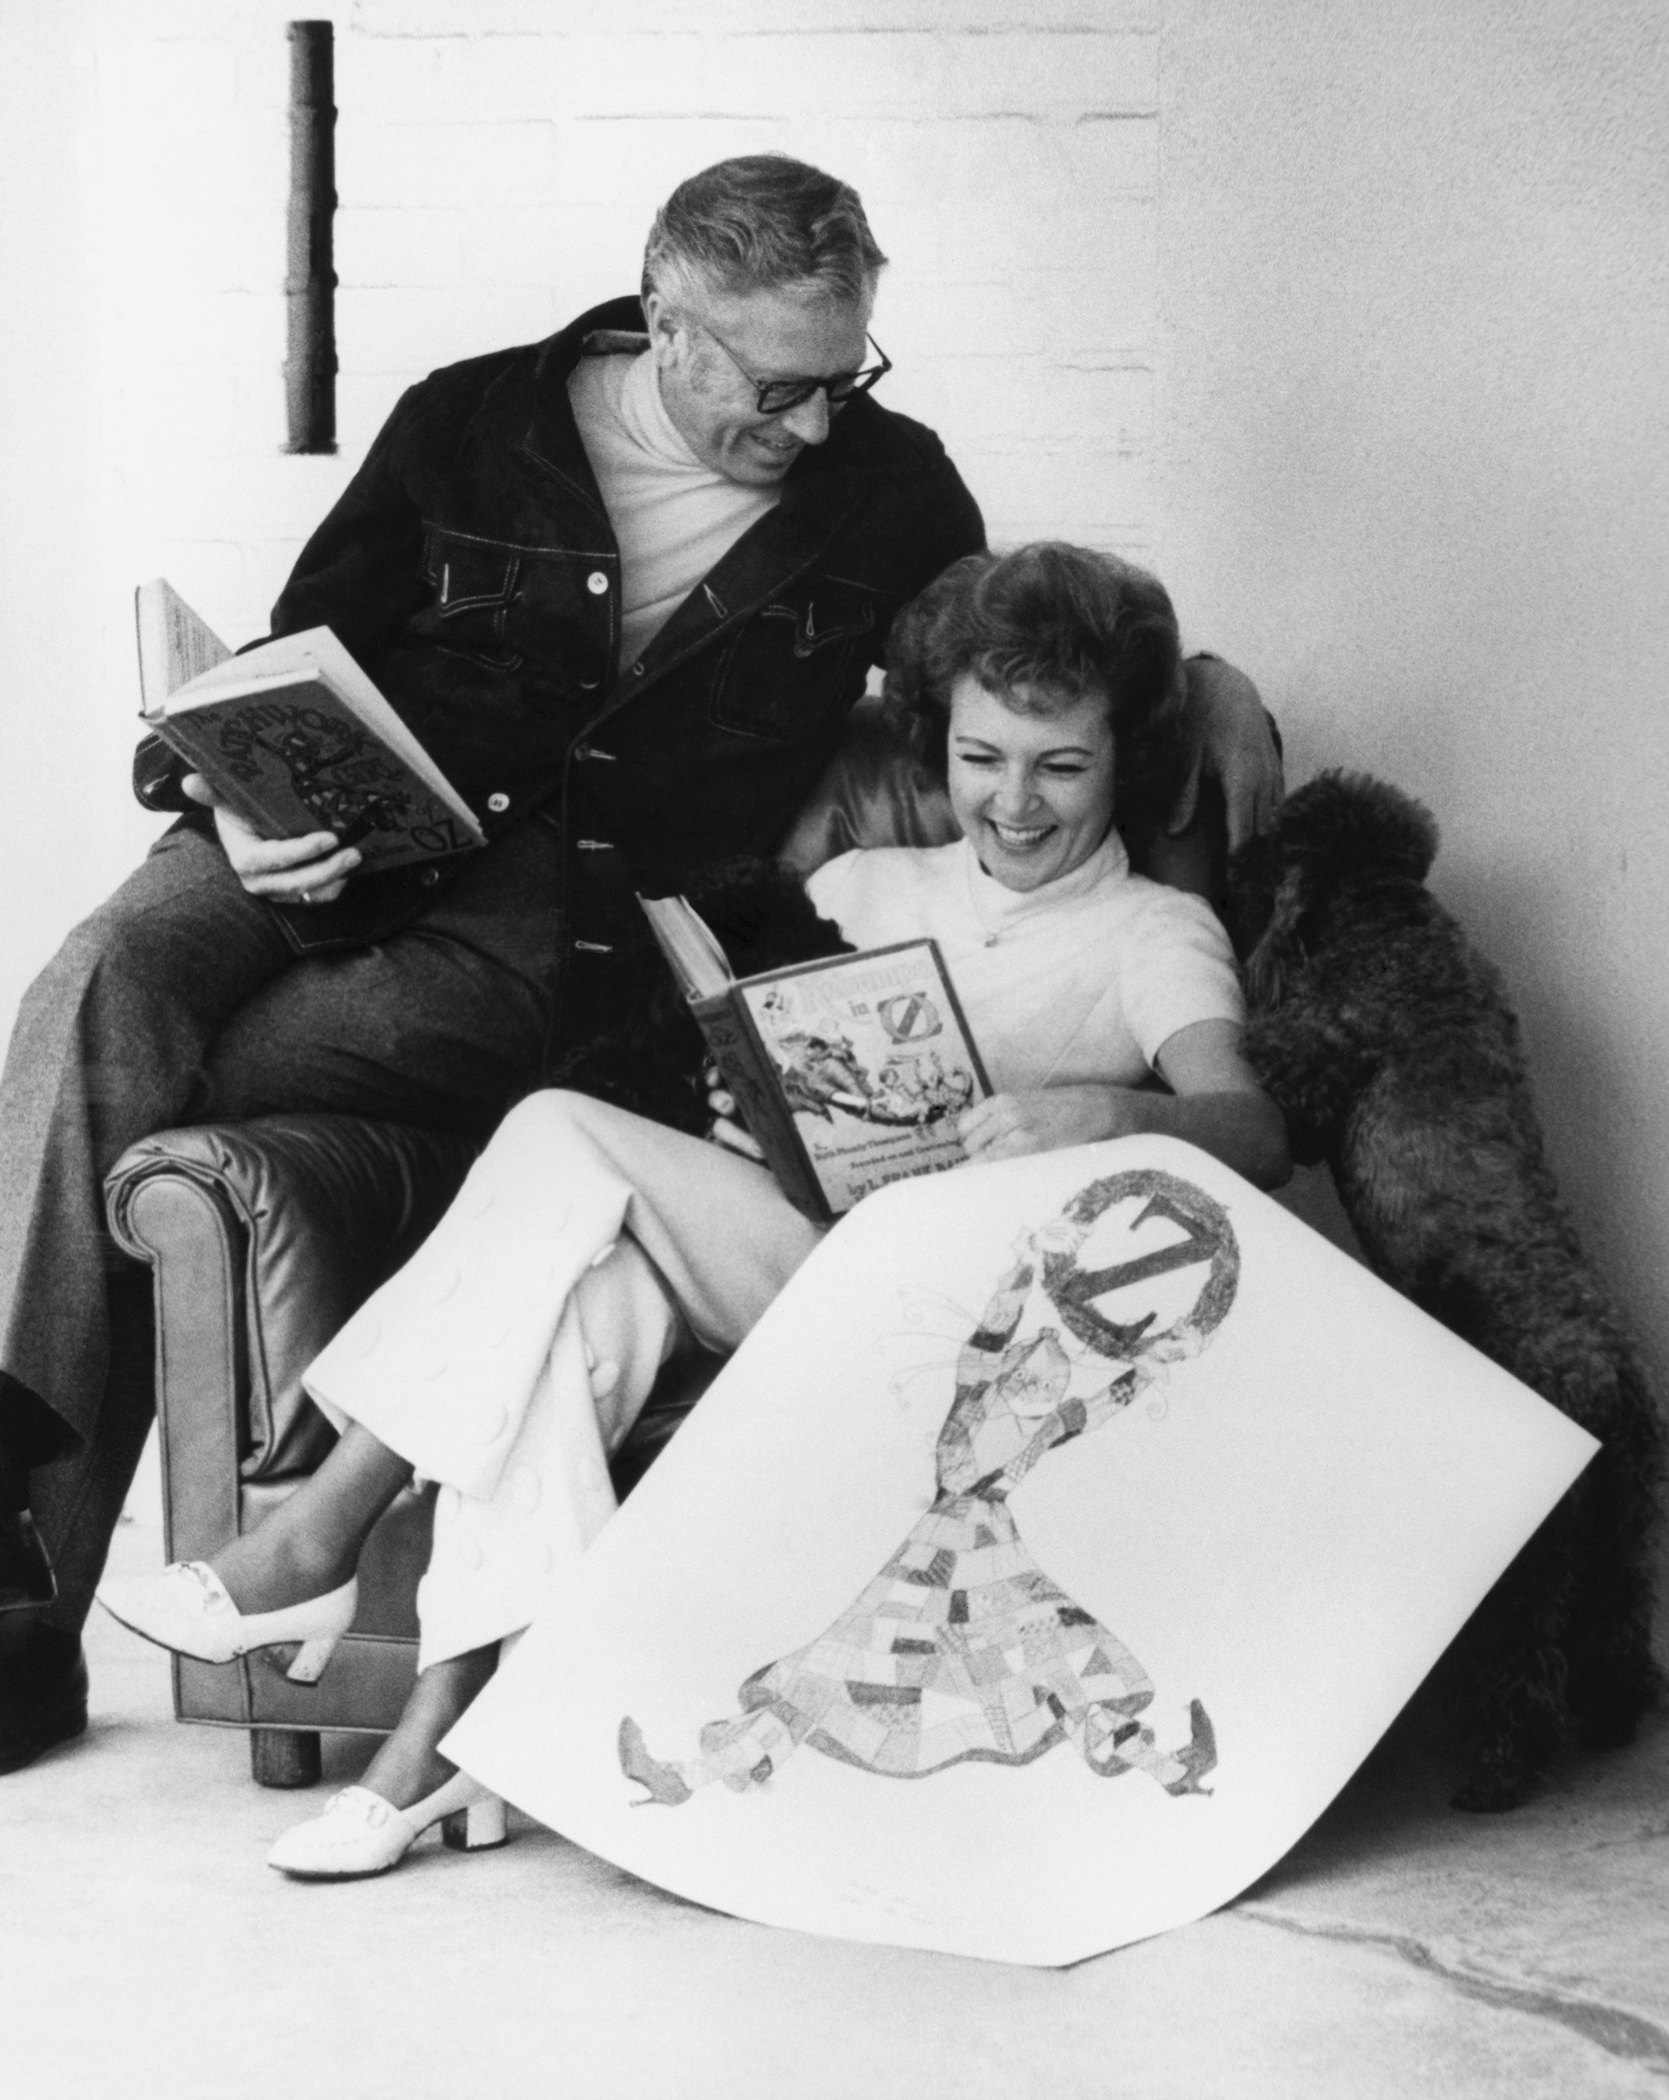 Betty White children? She had stepchildren from Allen Ludden. Here is Allen Ludden sitting on a chair with Betty White. They're both reading books and laughing.